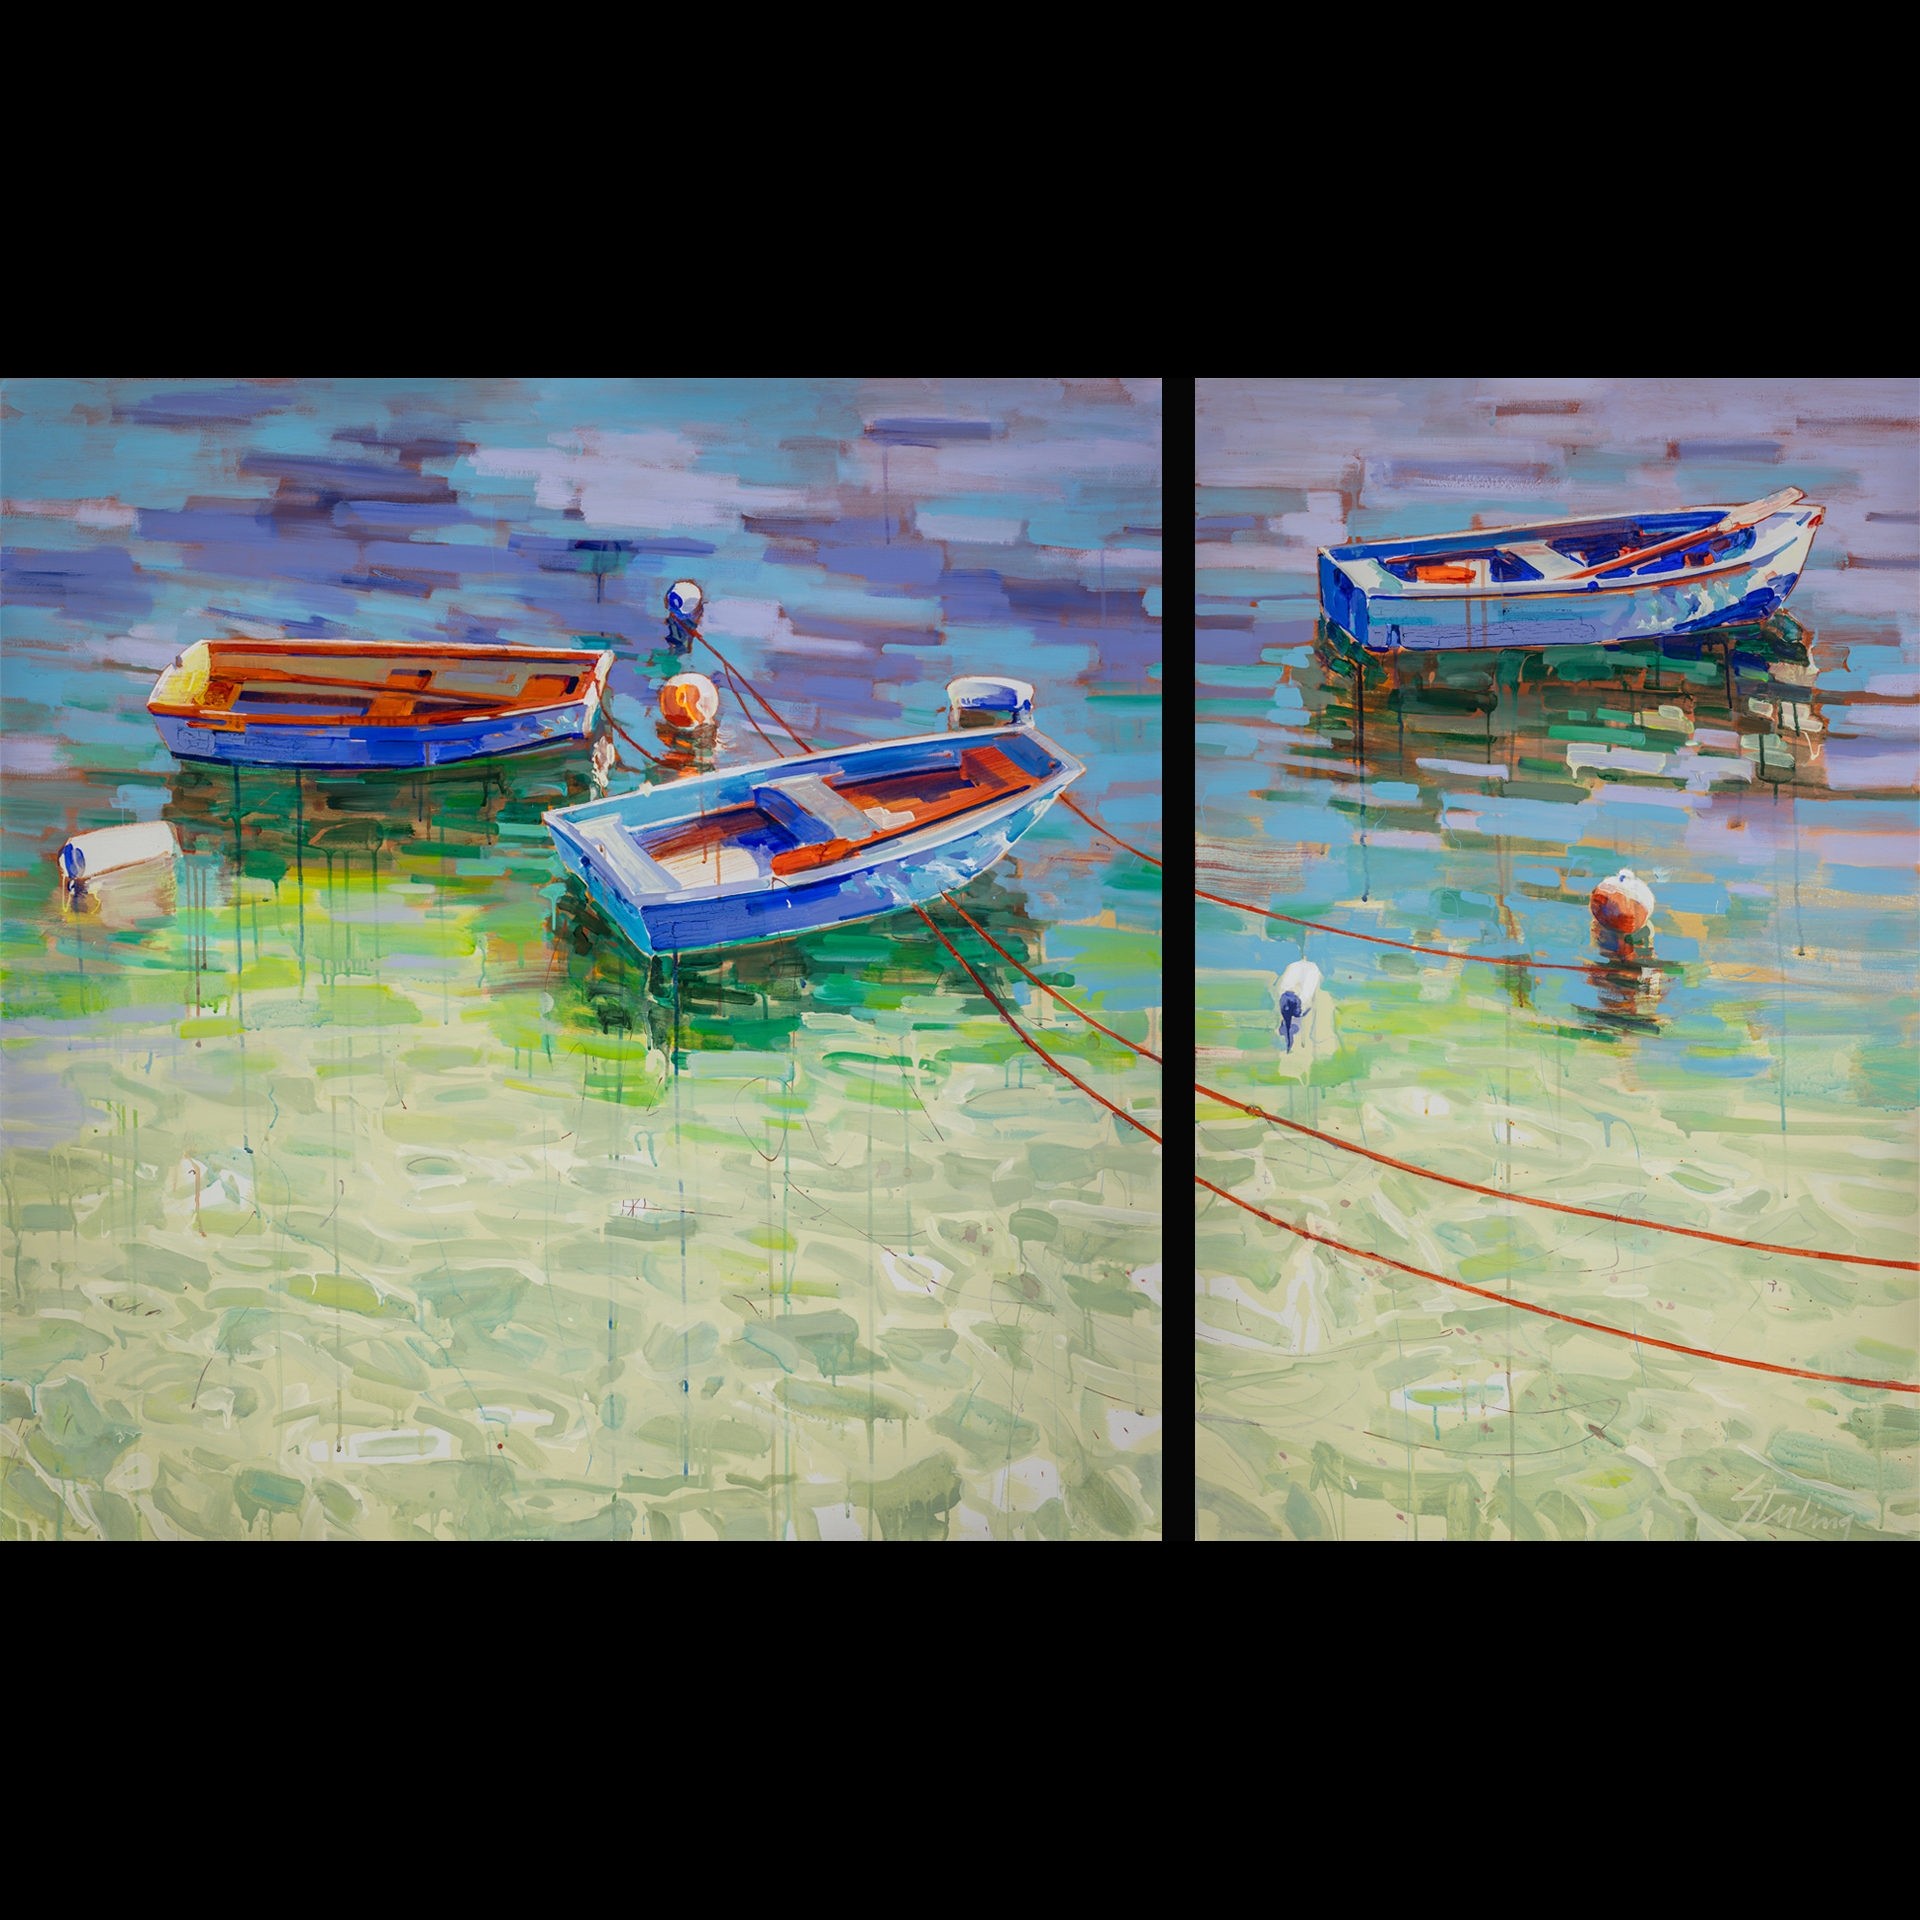 Boats and Buoys
48x78 diptych acrylic on canvas
$4000
show special: $3000